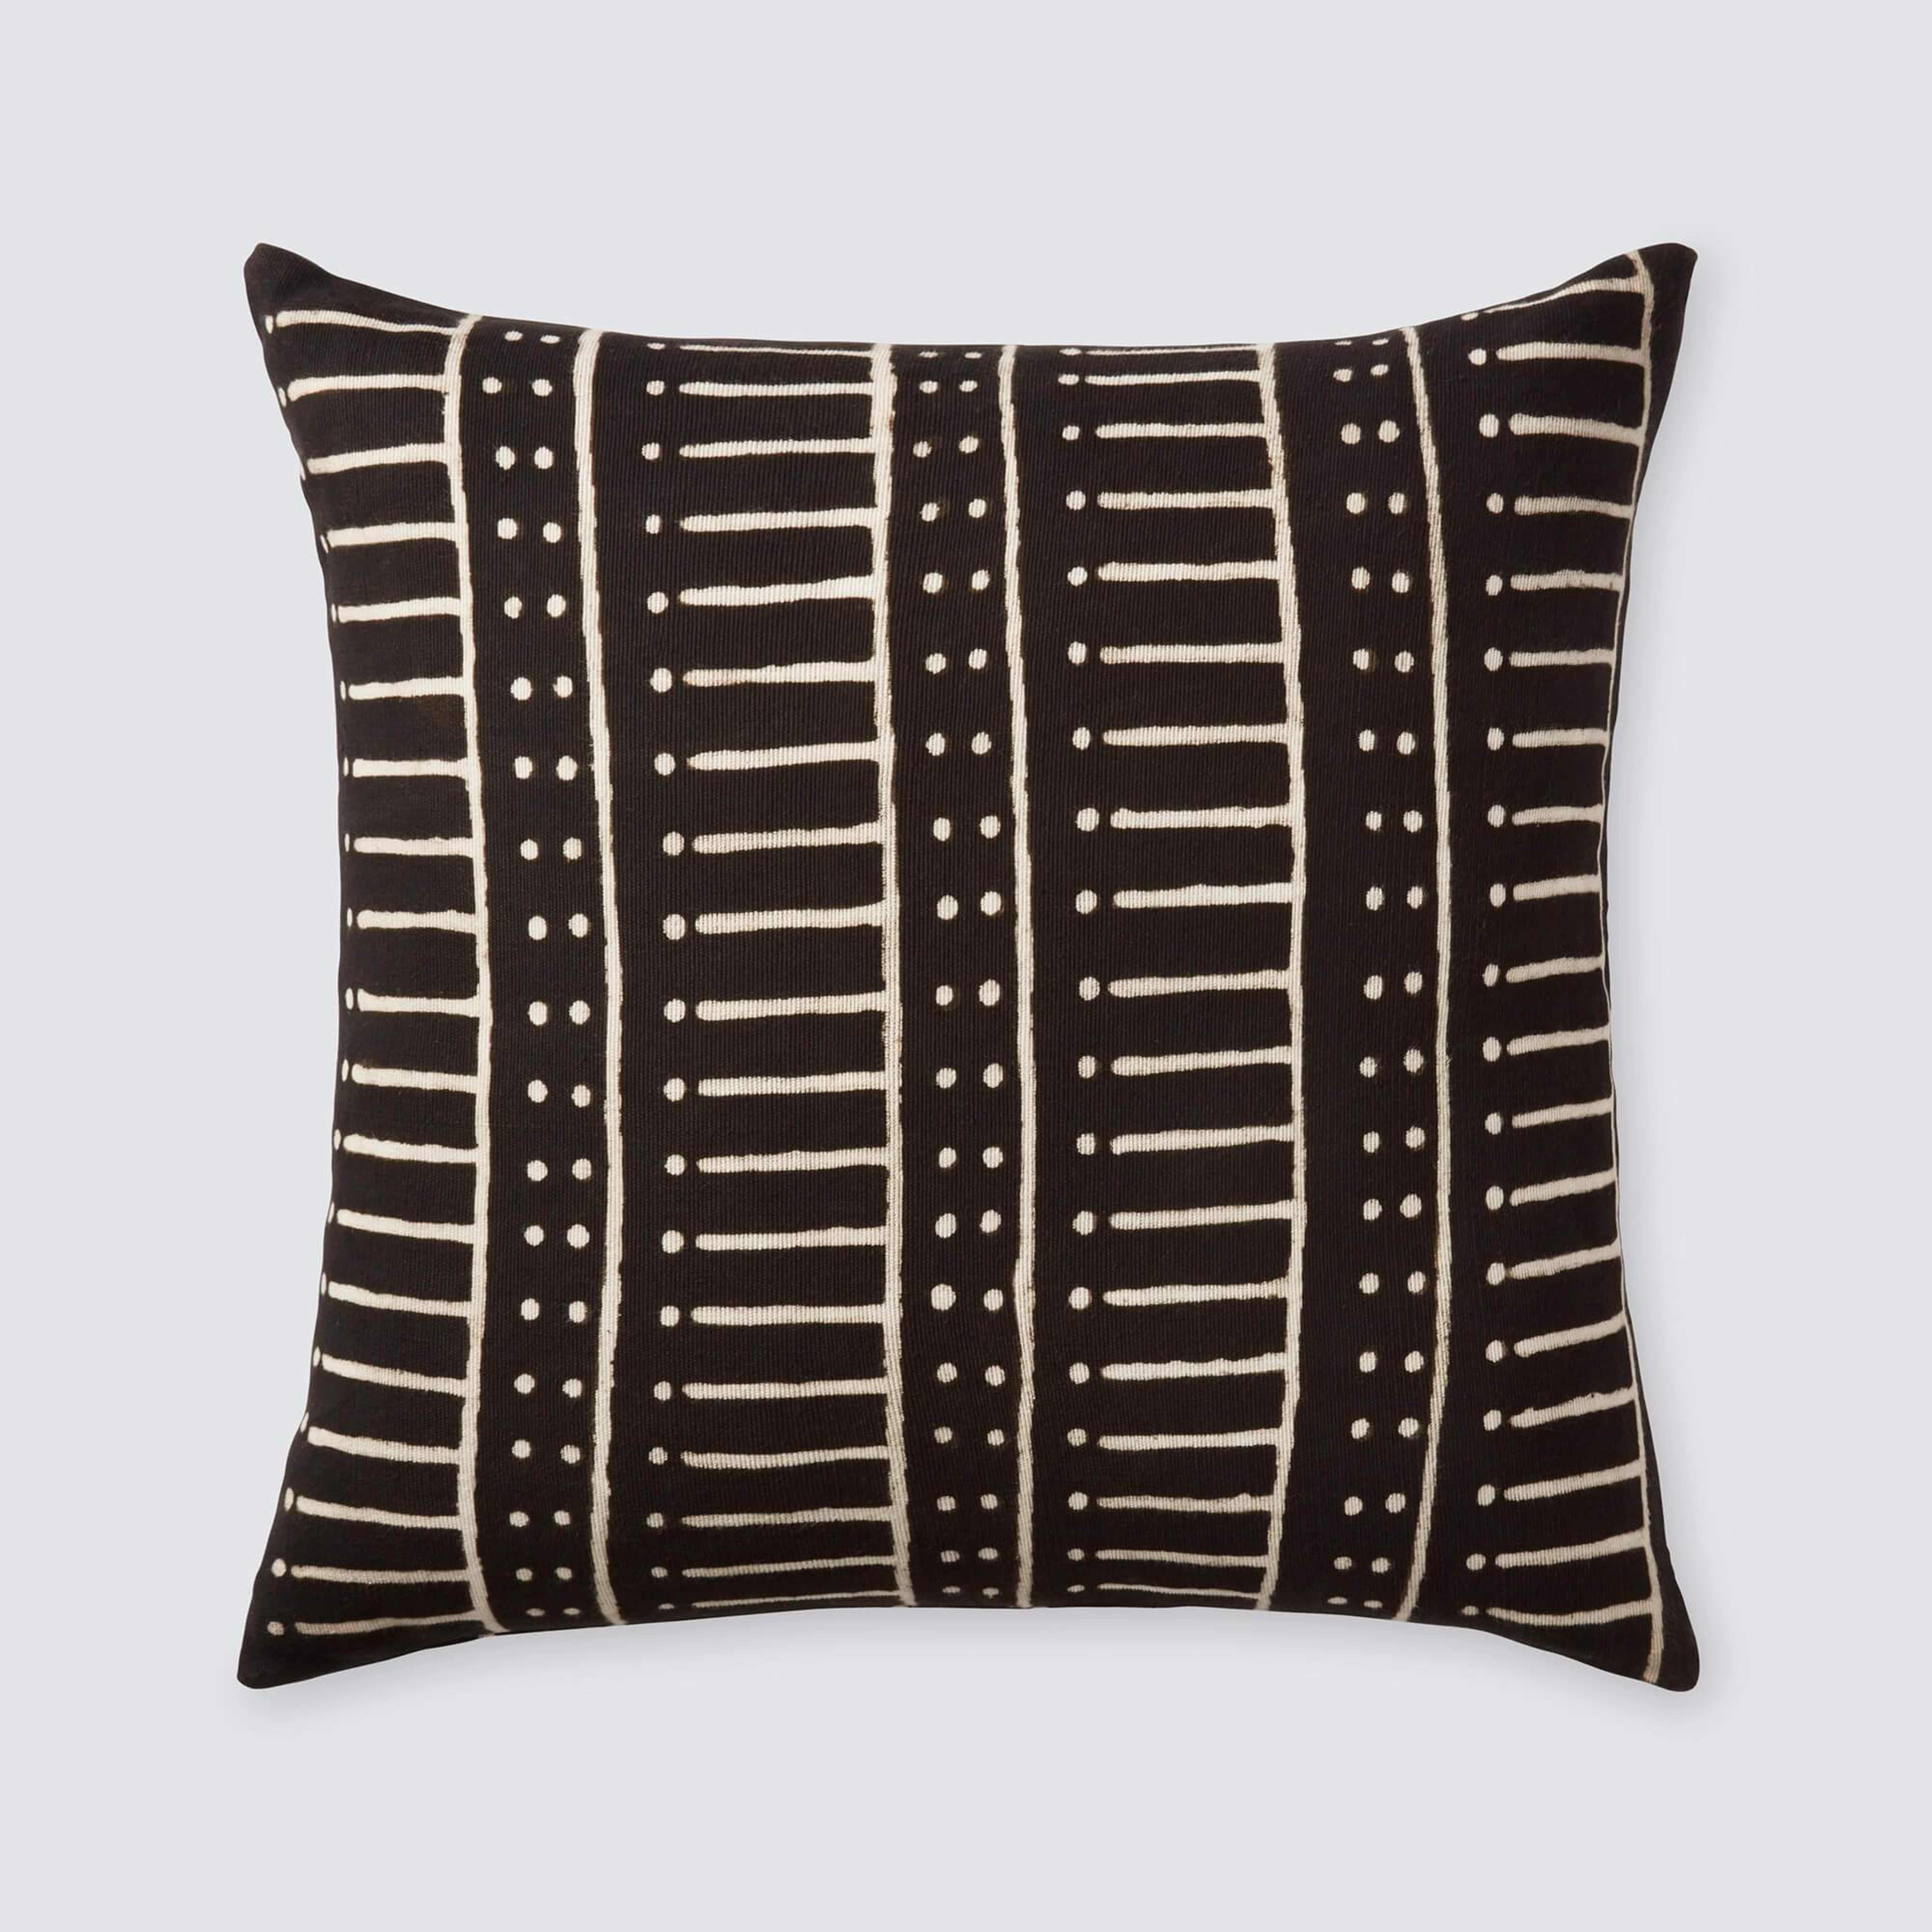 Etoile Mud Cloth Pillow By The Citizenry - The Citizenry